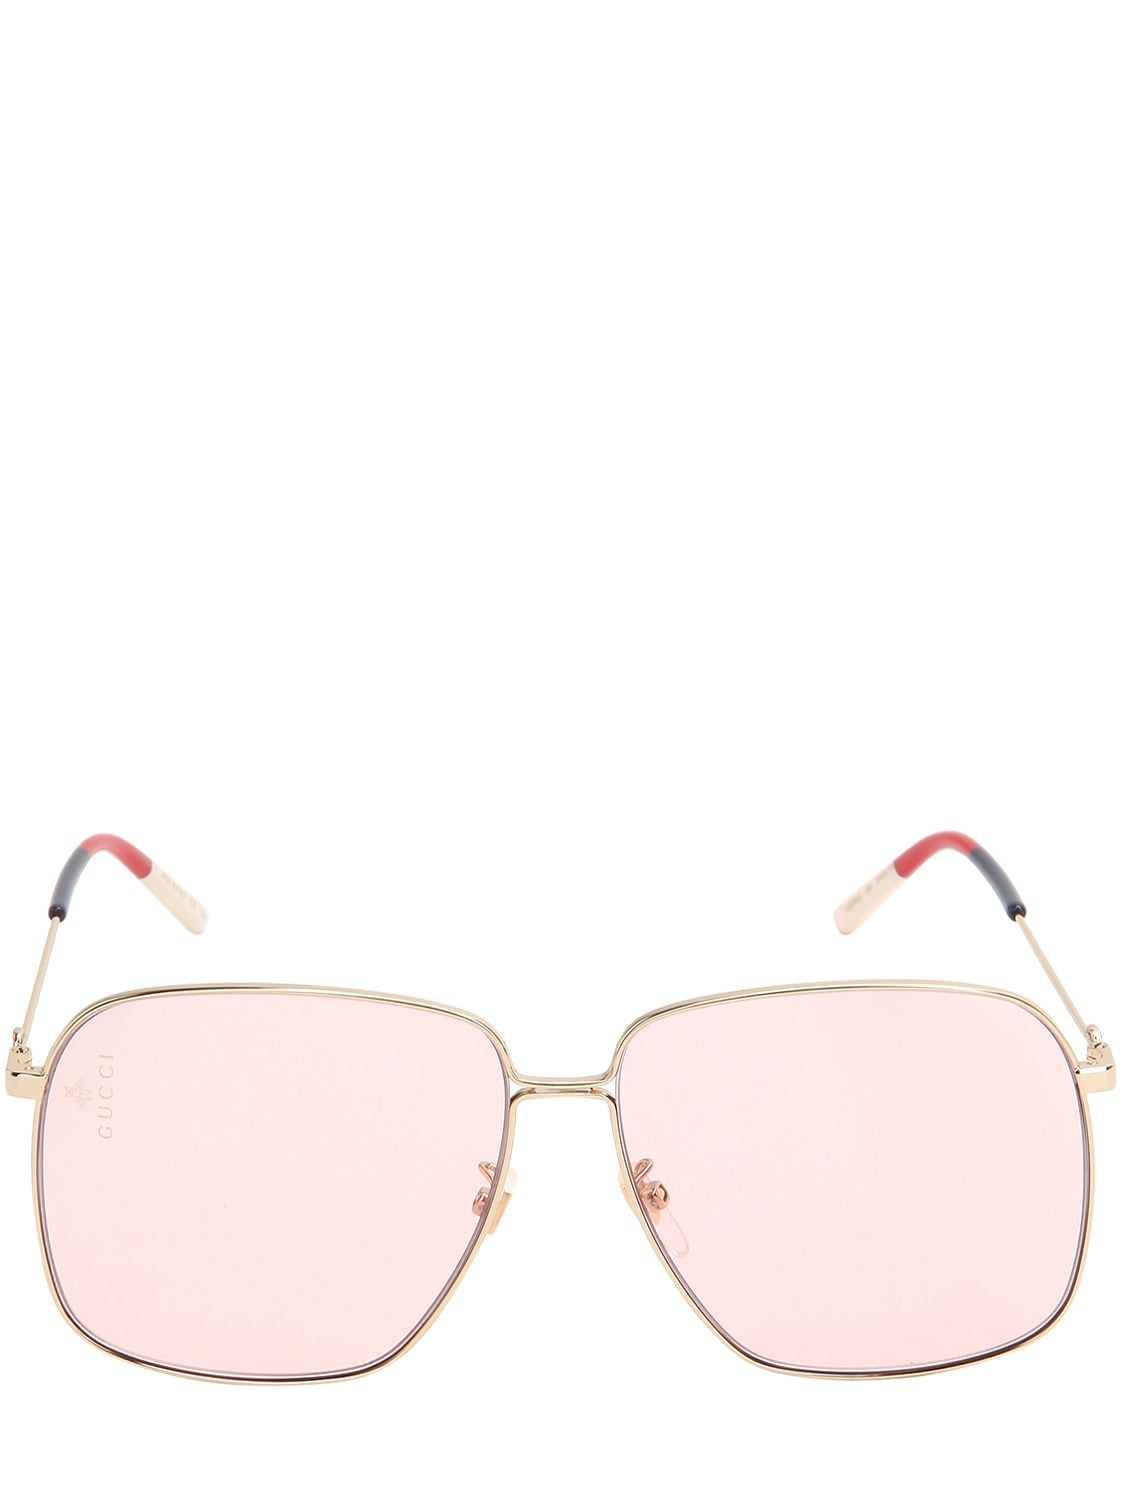 Gucci Large Round Sunglasses In Pink | ModeSens